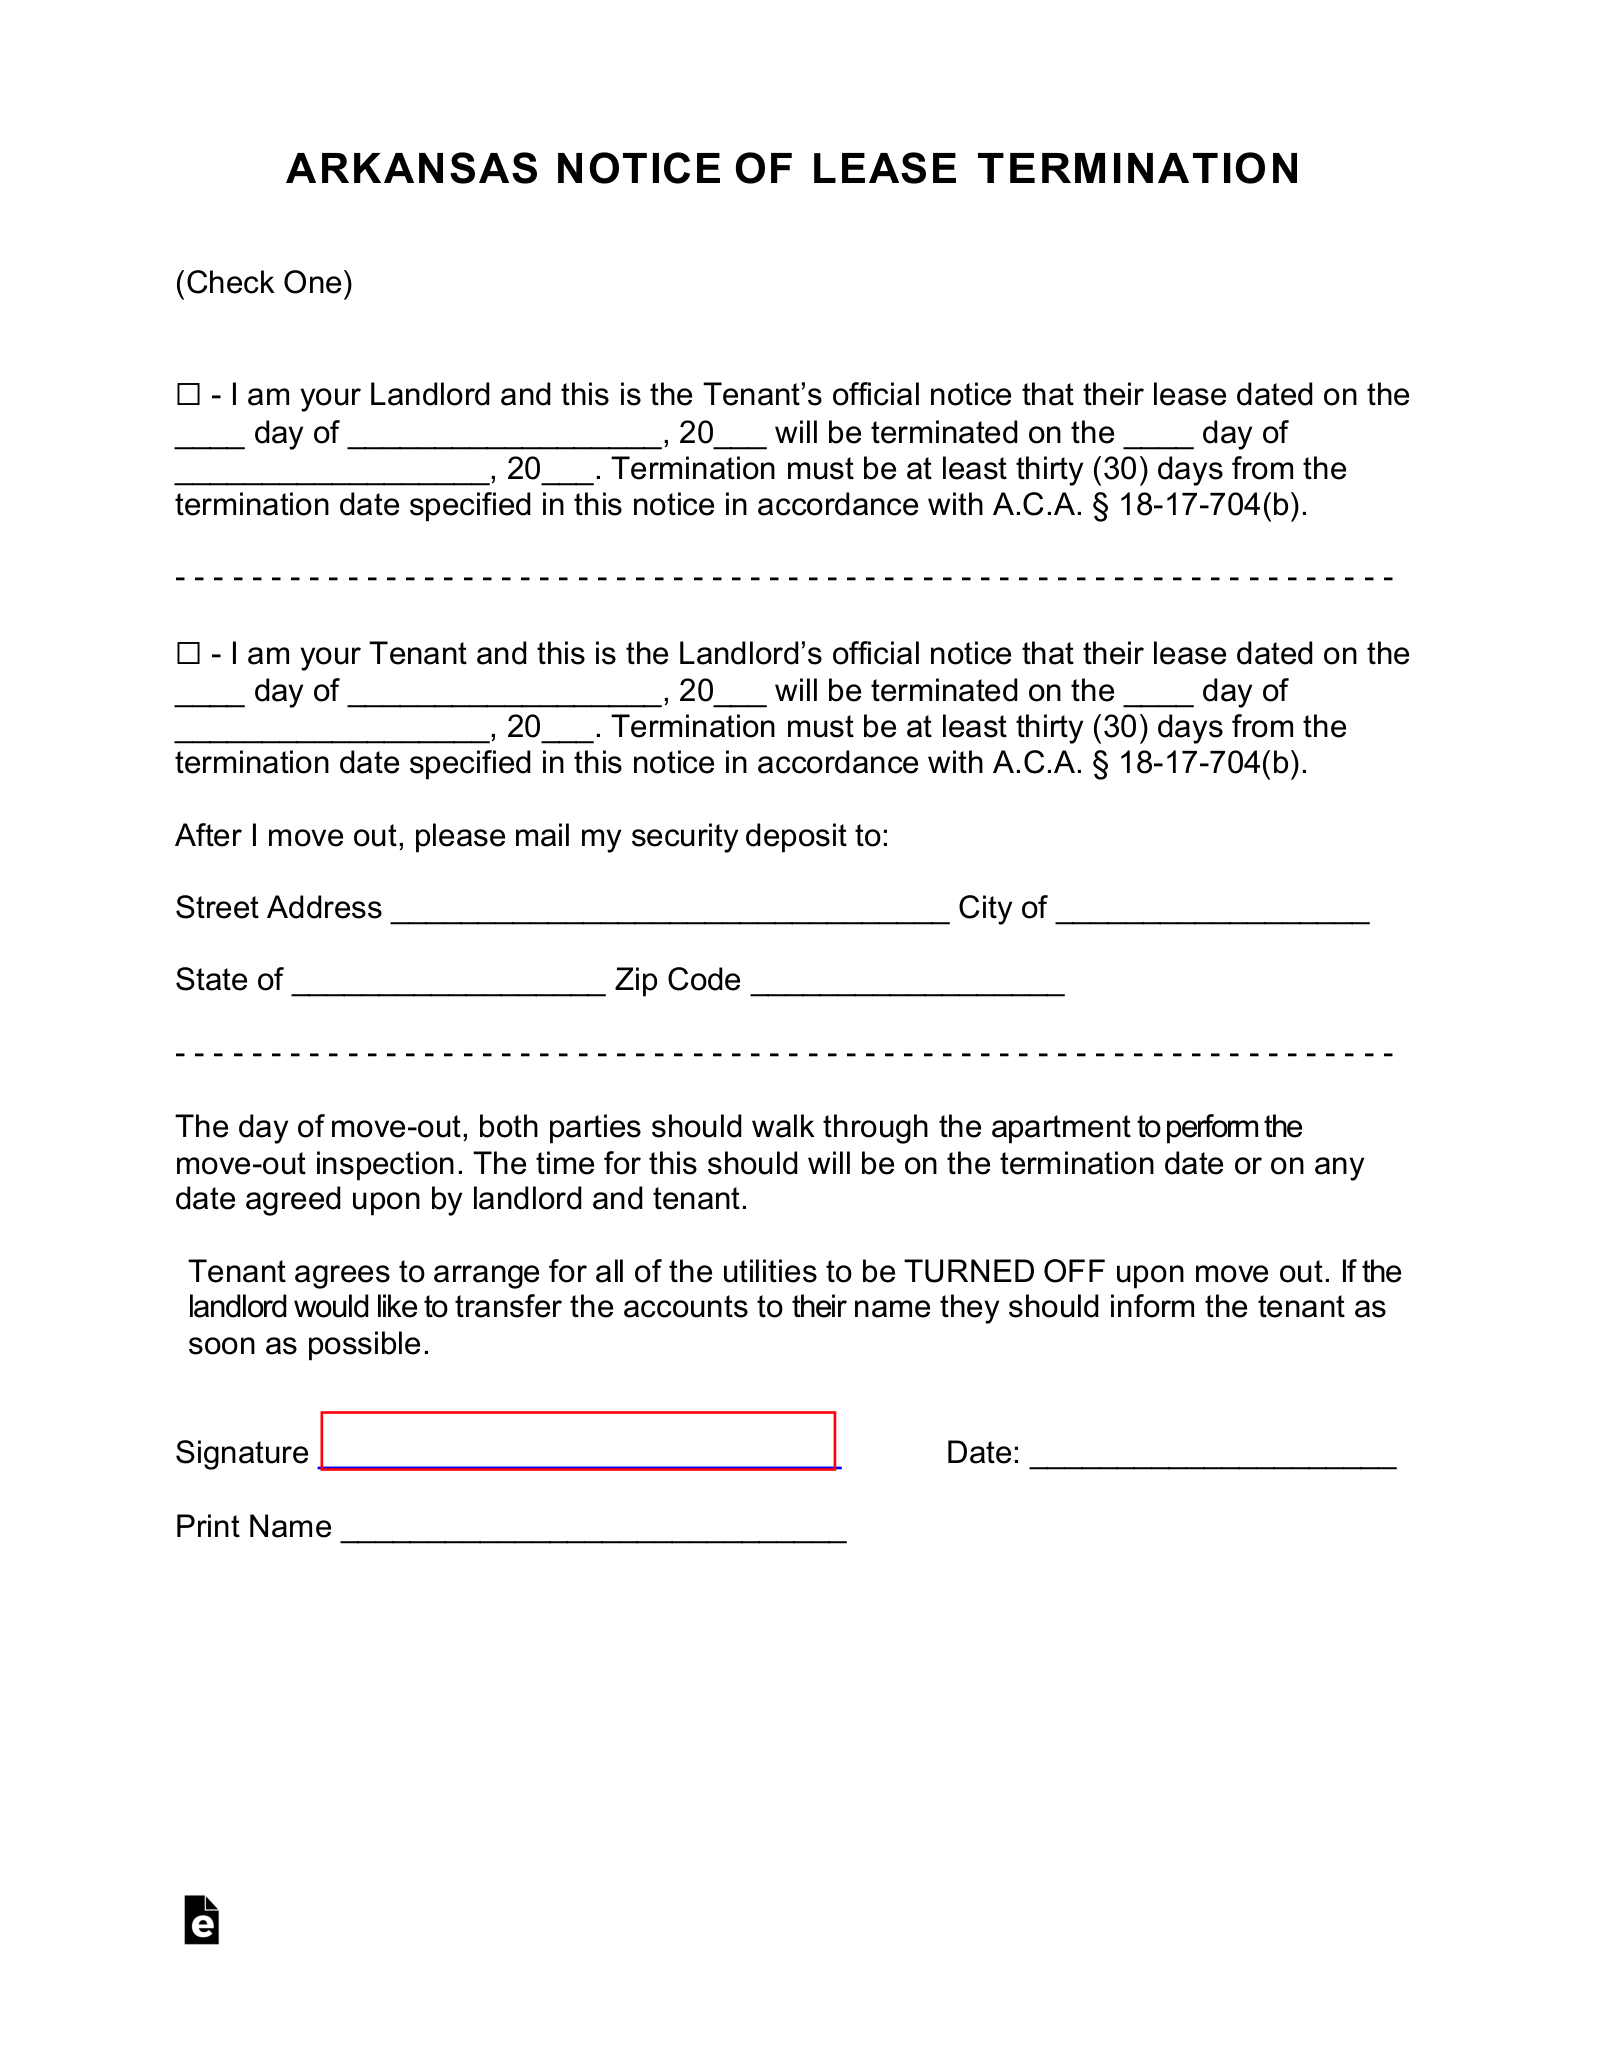 Arkansas Lease Termination Letter Form | 30-Day Notice